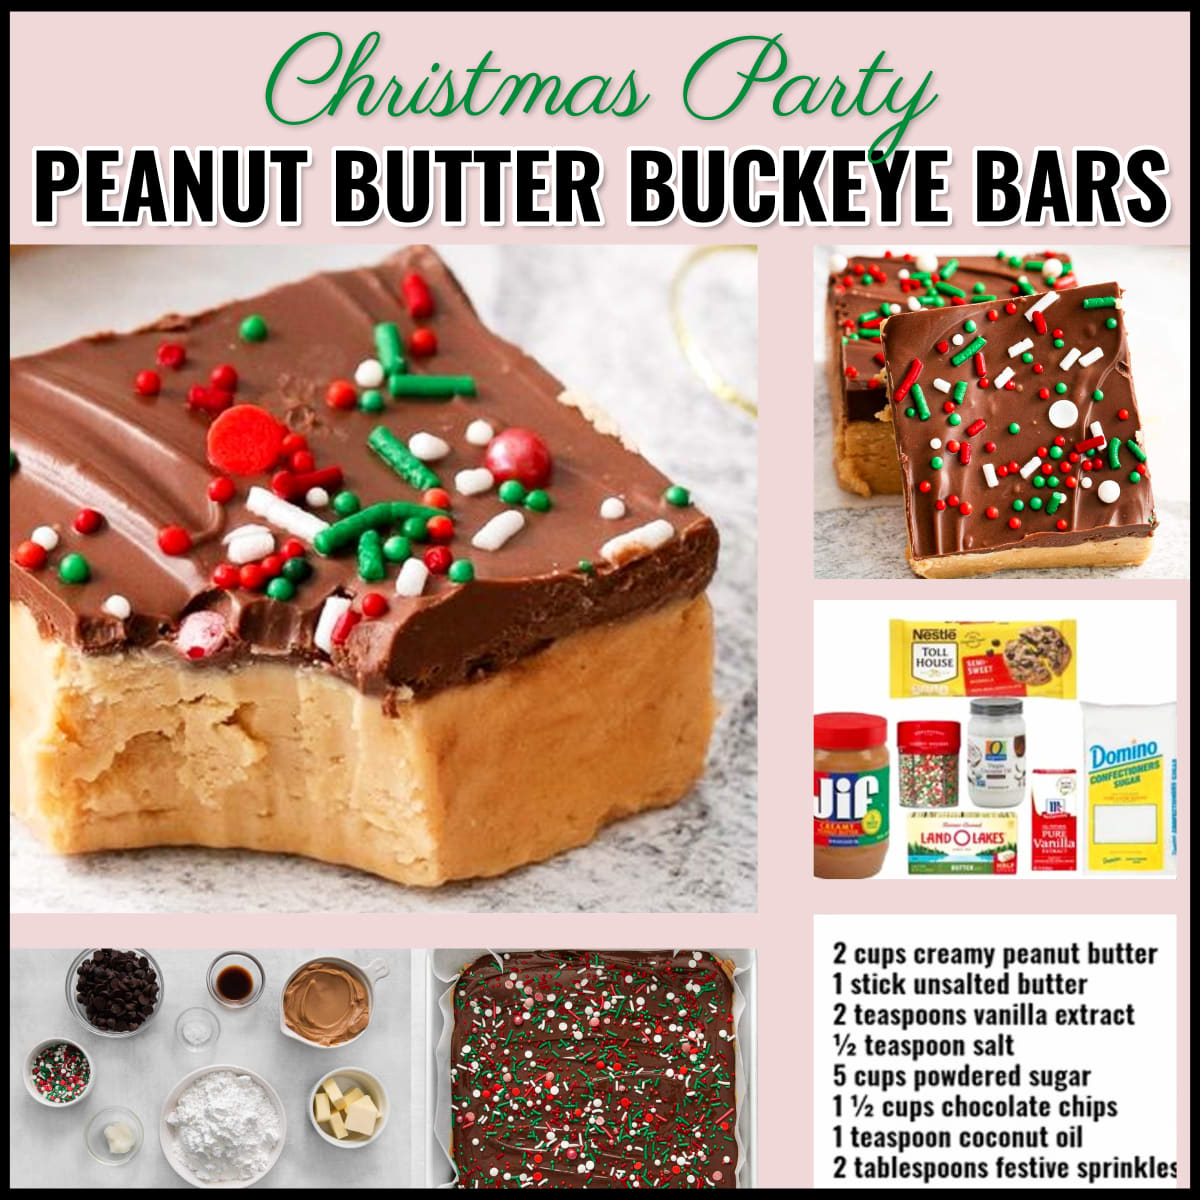 Christmas party peanut butter buckeye bars - the perfect large group potluck dessert for a crowd at work, church or ANY holiday open house party